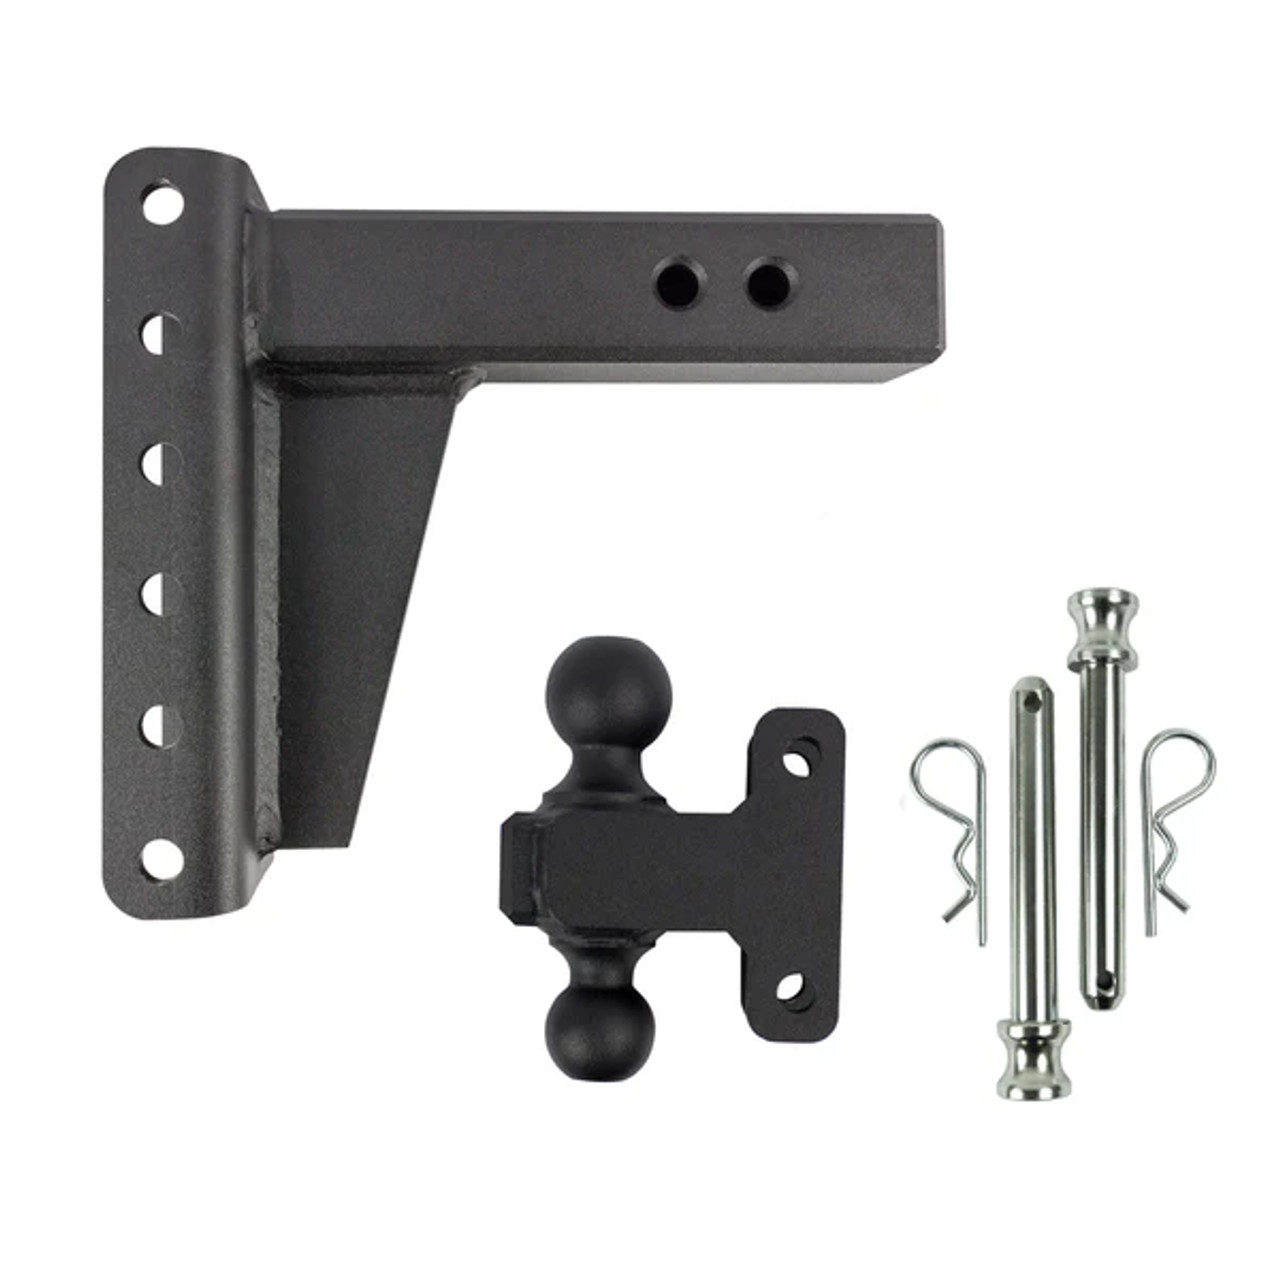 BPED256 --- Dual-Ball Four Position 2-1/2" Shank Extreme Duty Hitch - 36k